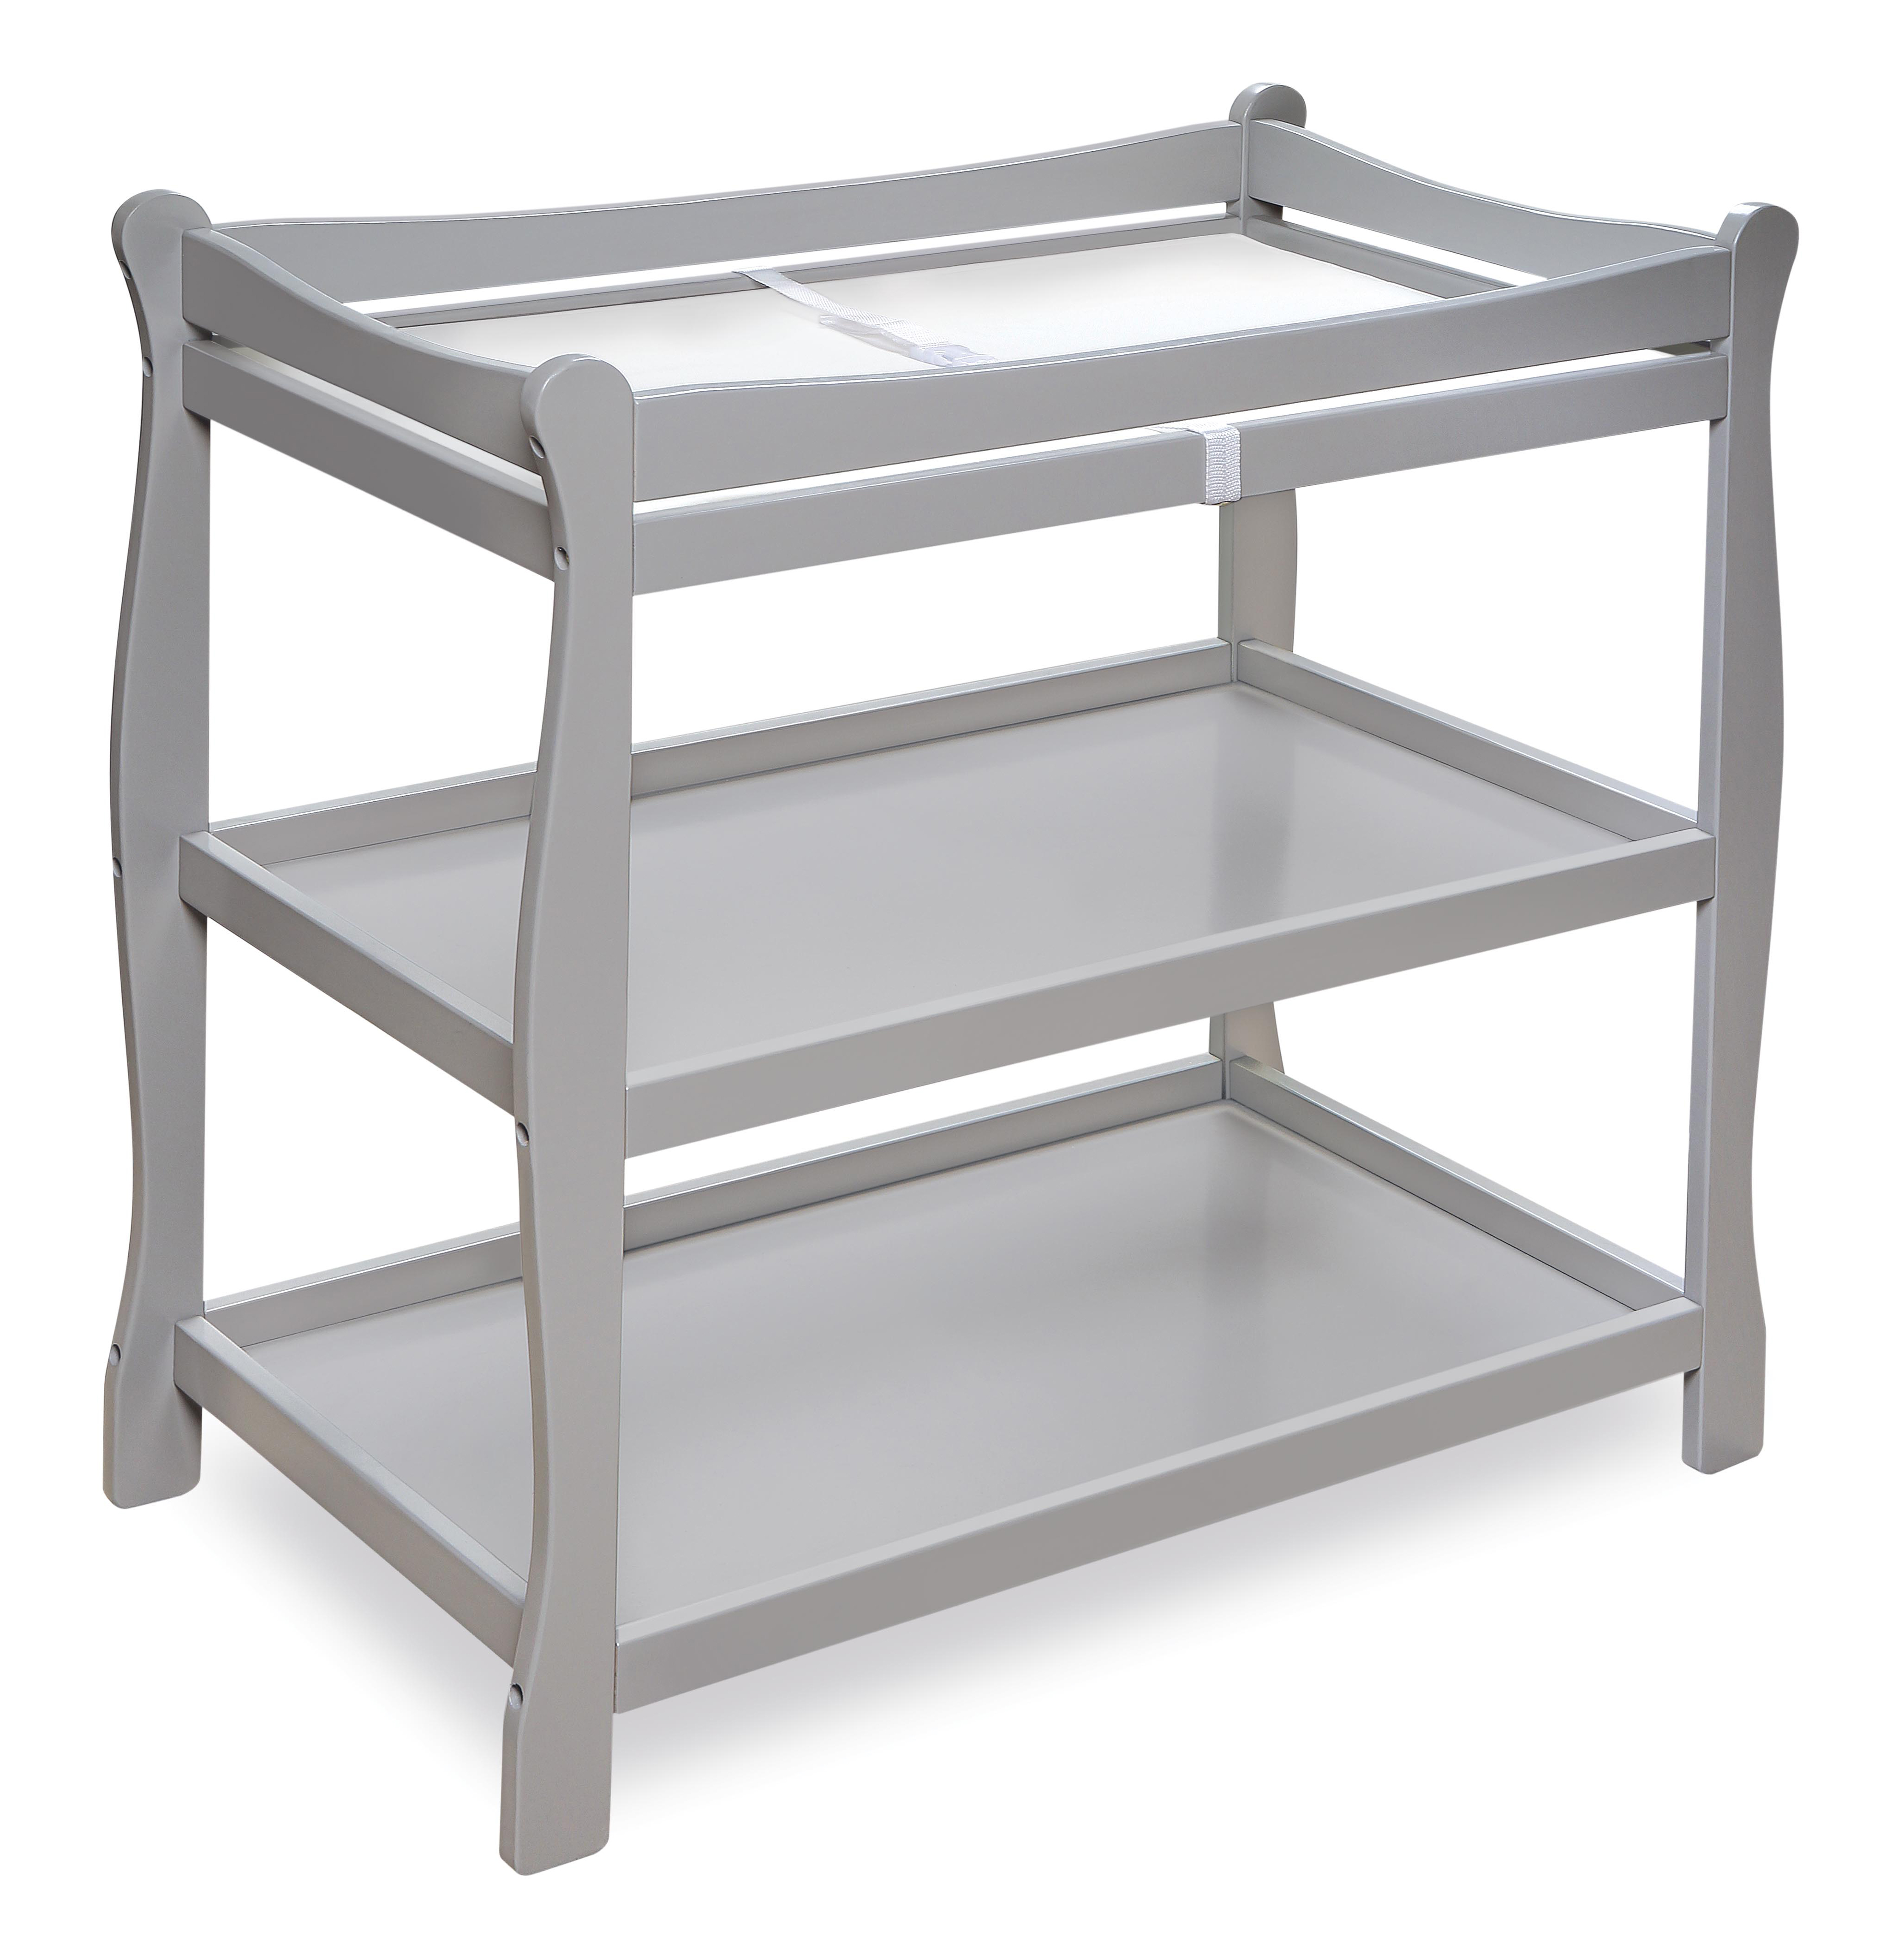 Sleigh Style Baby Changing Table - Gray